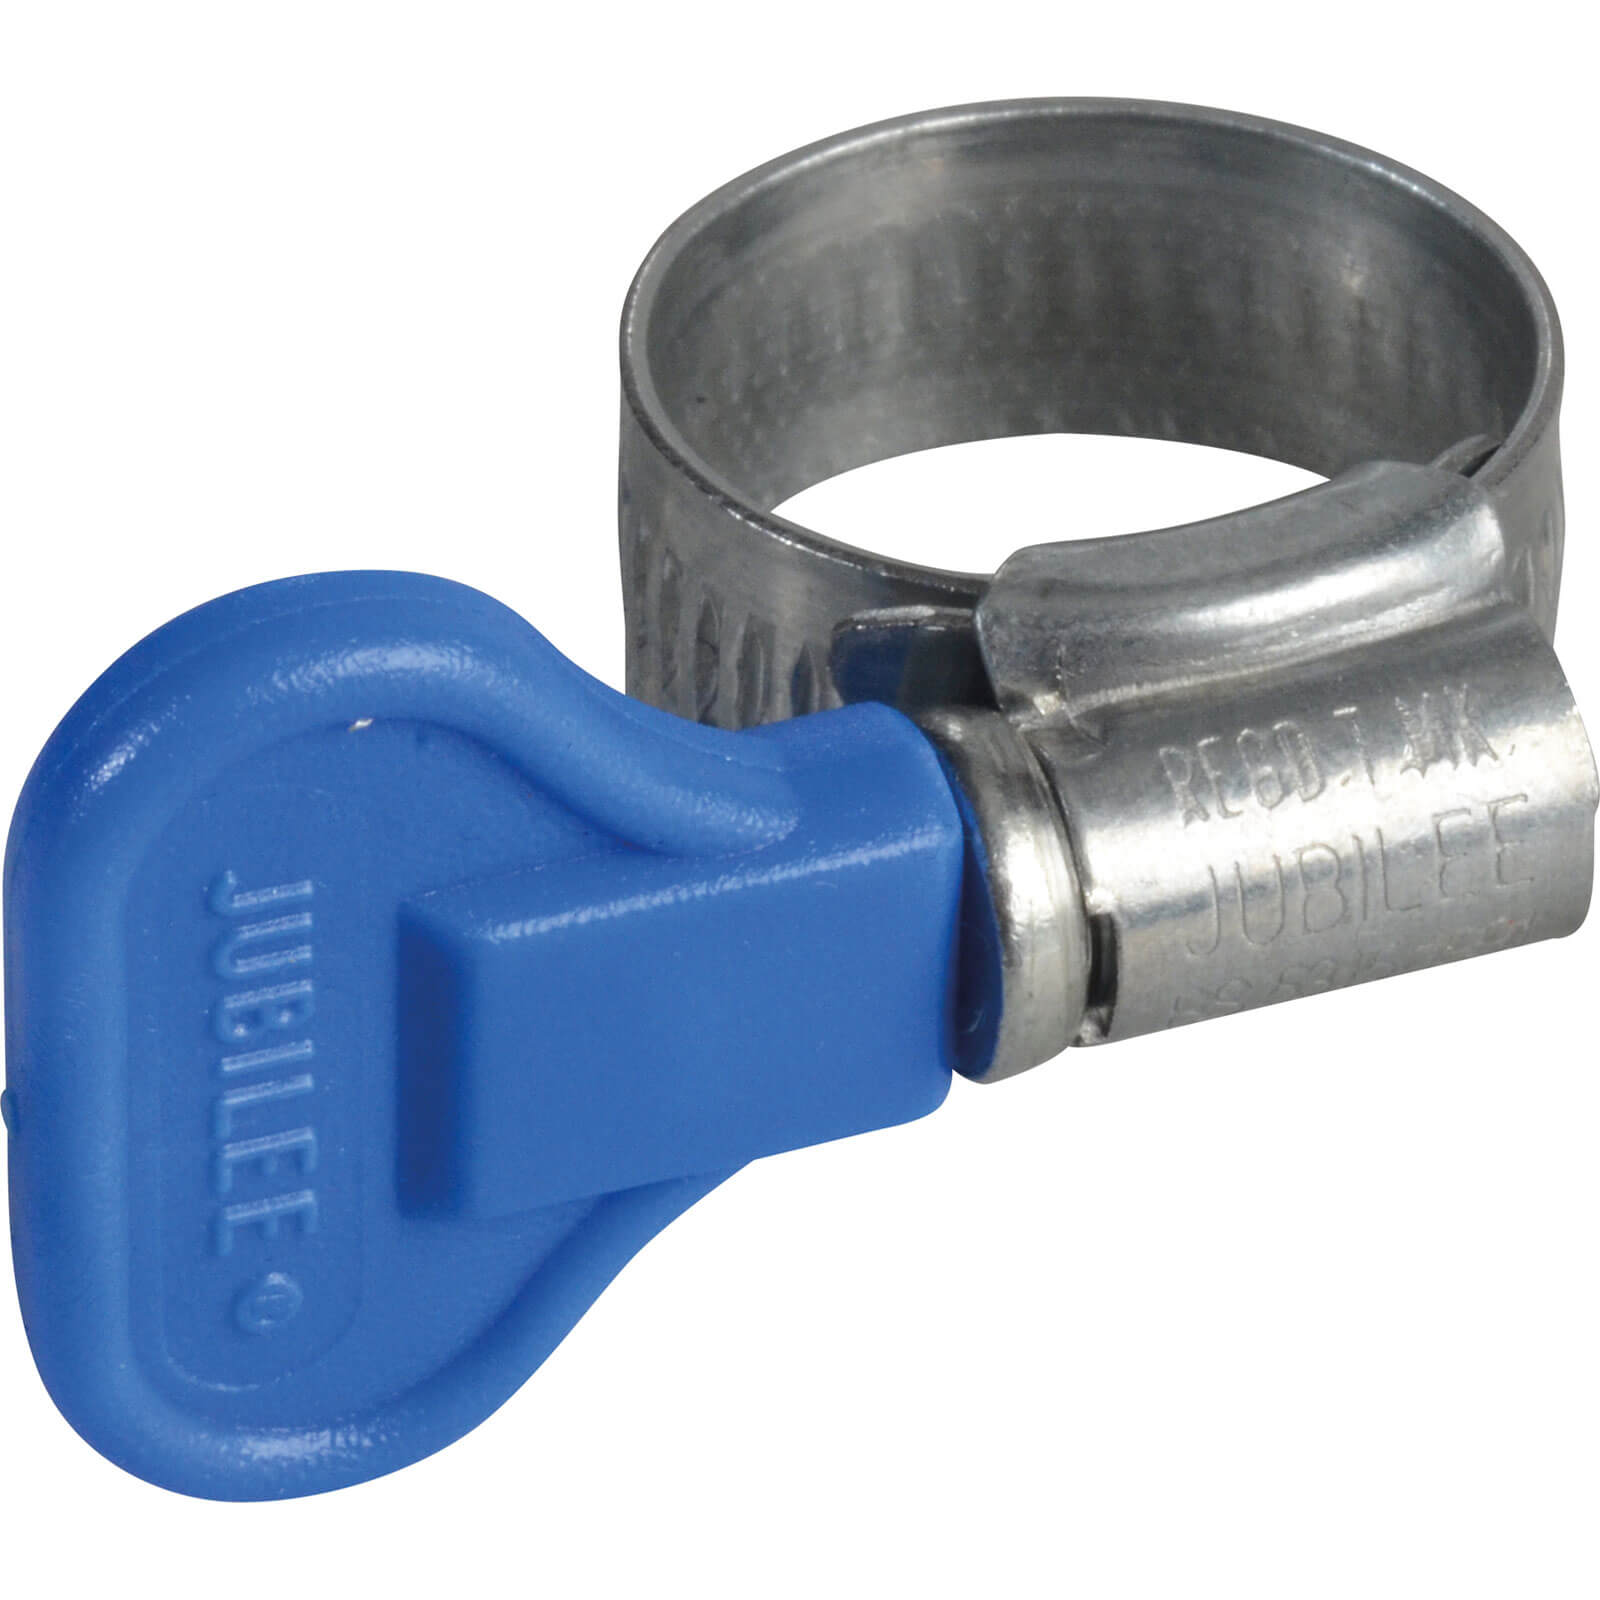 Jubilee OX Zinc Plated Hose Clip with Wing Spade 13 - 20mm (1/2 to 3/4")